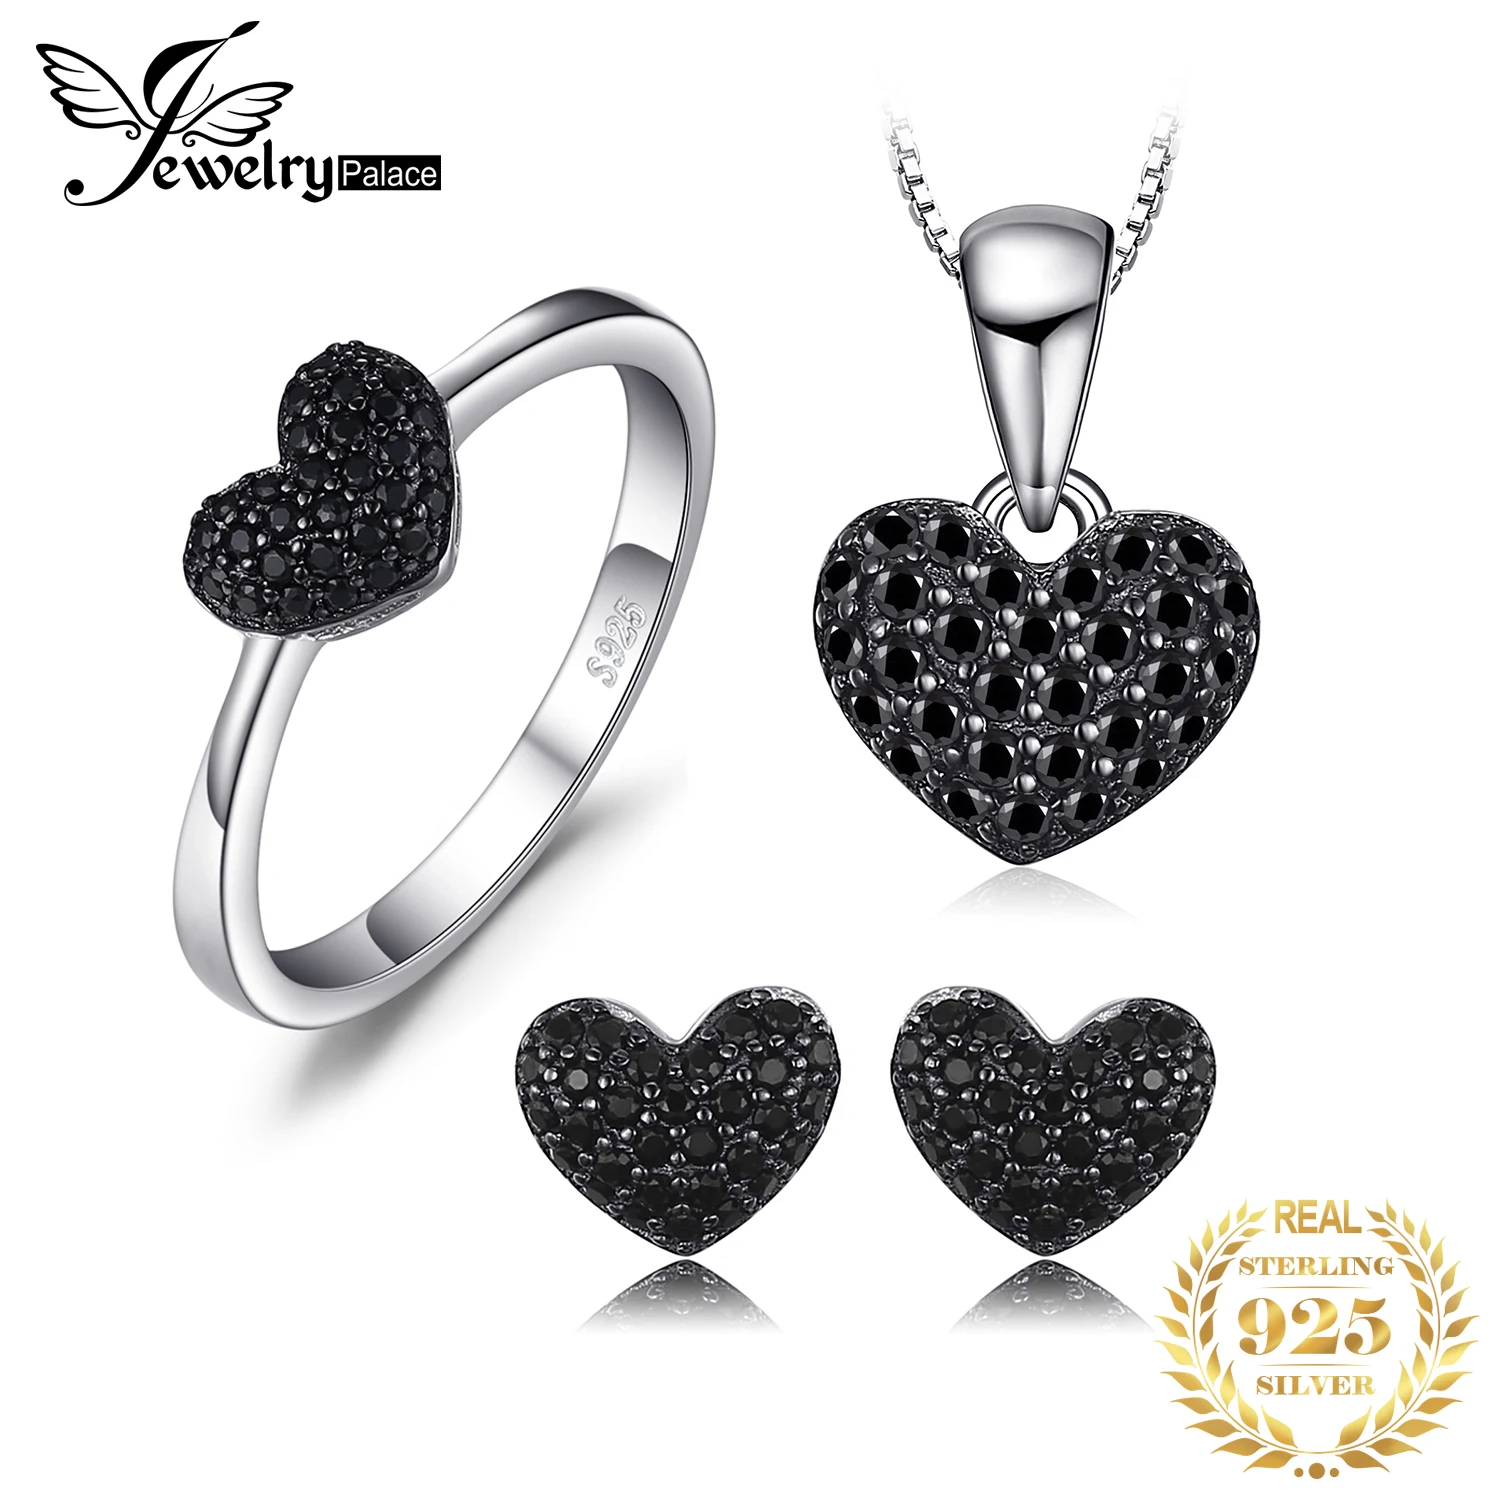 JewelryPalace Heart Love Natural Black Spinel 925 Sterling Silver Ring Pendant Necklace Stud Earrings Gemstone Women Jewelry Set